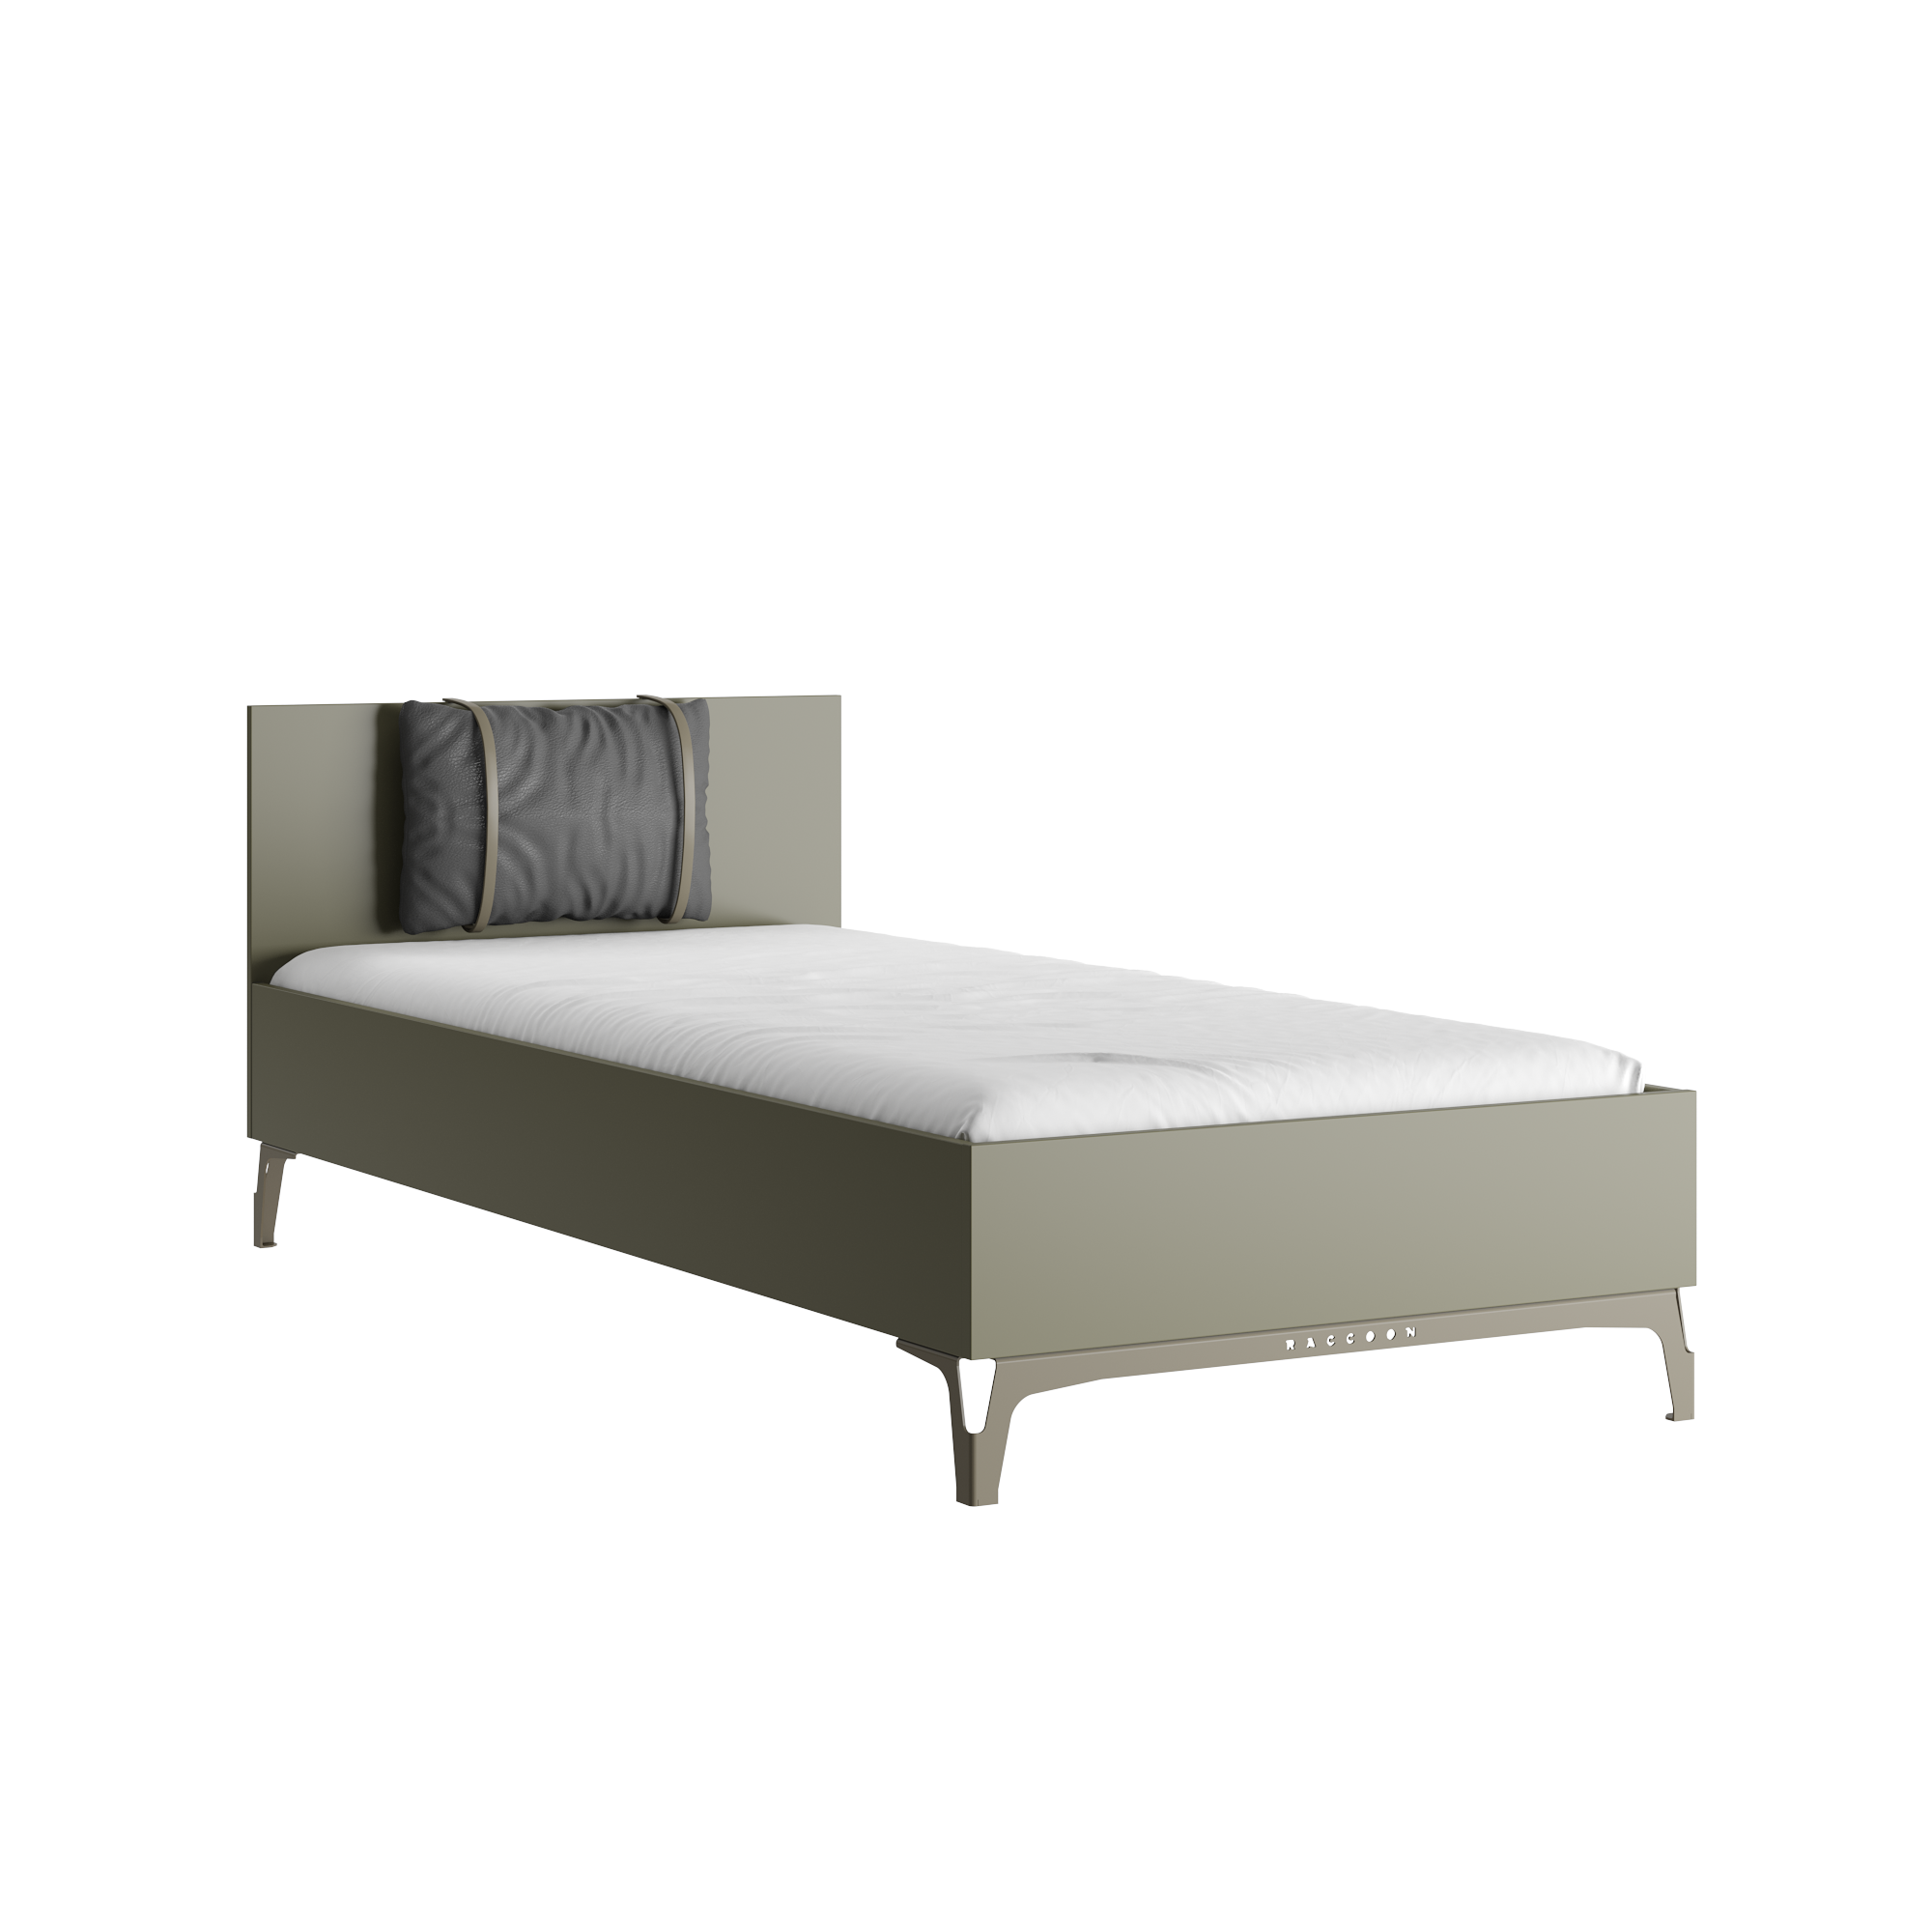 TOMI™ MILITARY Design Bed